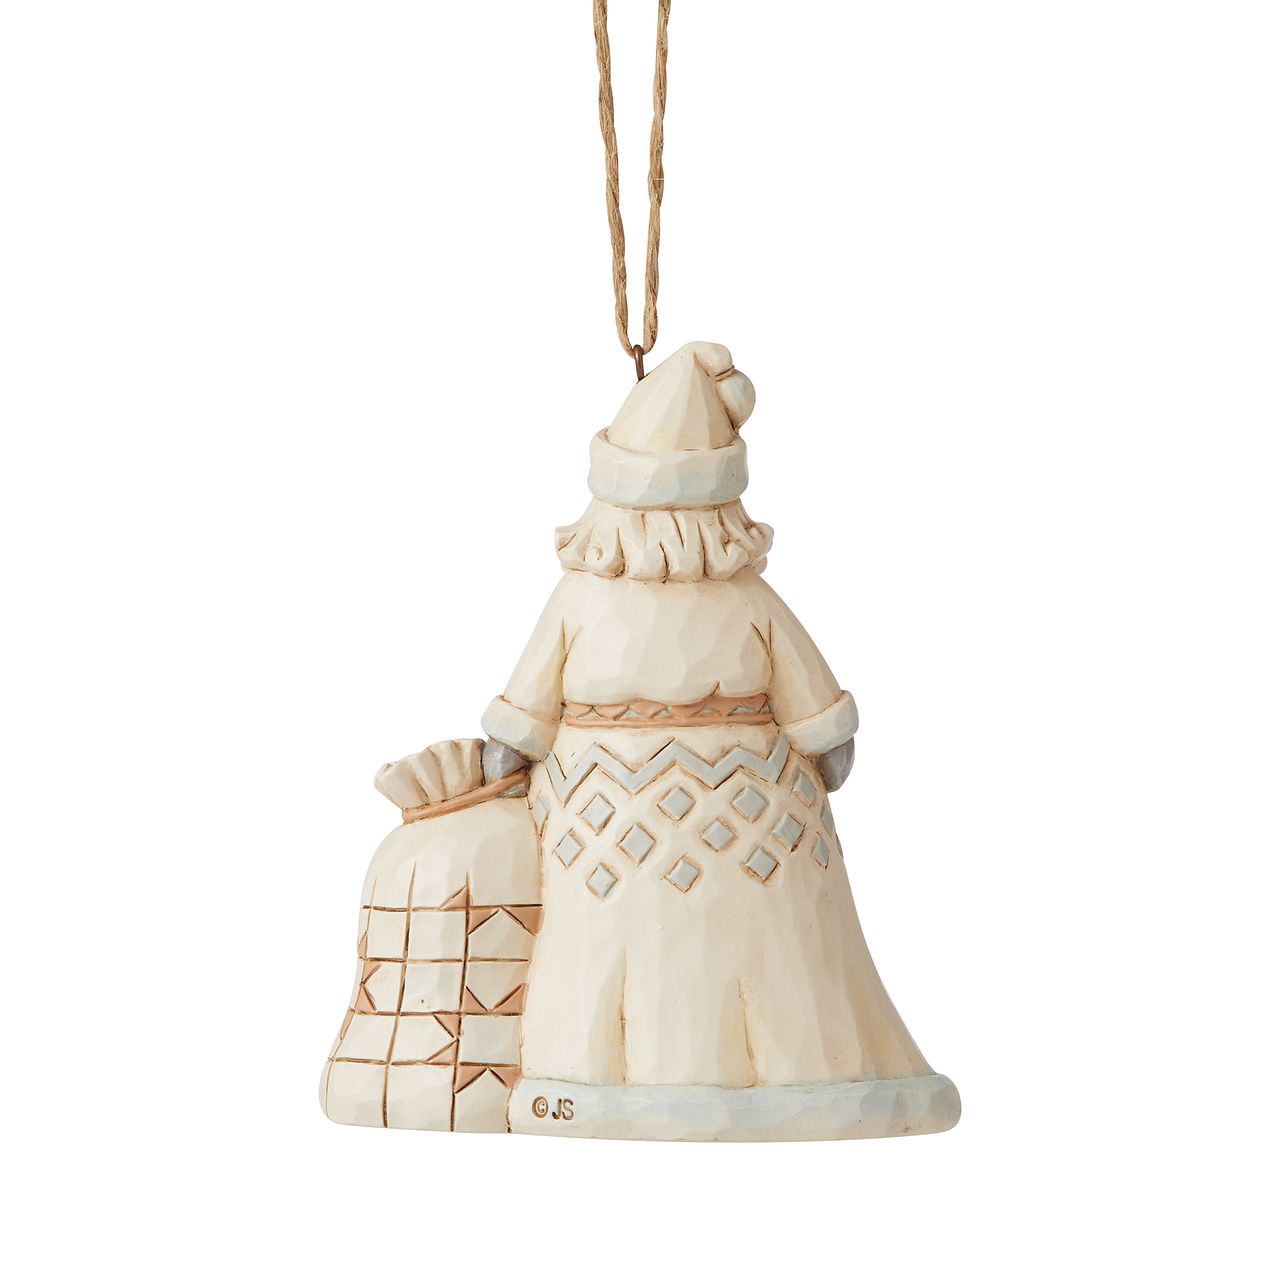 Jim Shore Heartwood Creek White Woodland Santa Hanging Ornament  In muted colors, this cool hued Santa brings grandeur with his deliveries. With a bag heavy with presents, this Christmas hero smiles happily from your tree, admiring the nice boys and girls as they open presents in your home.